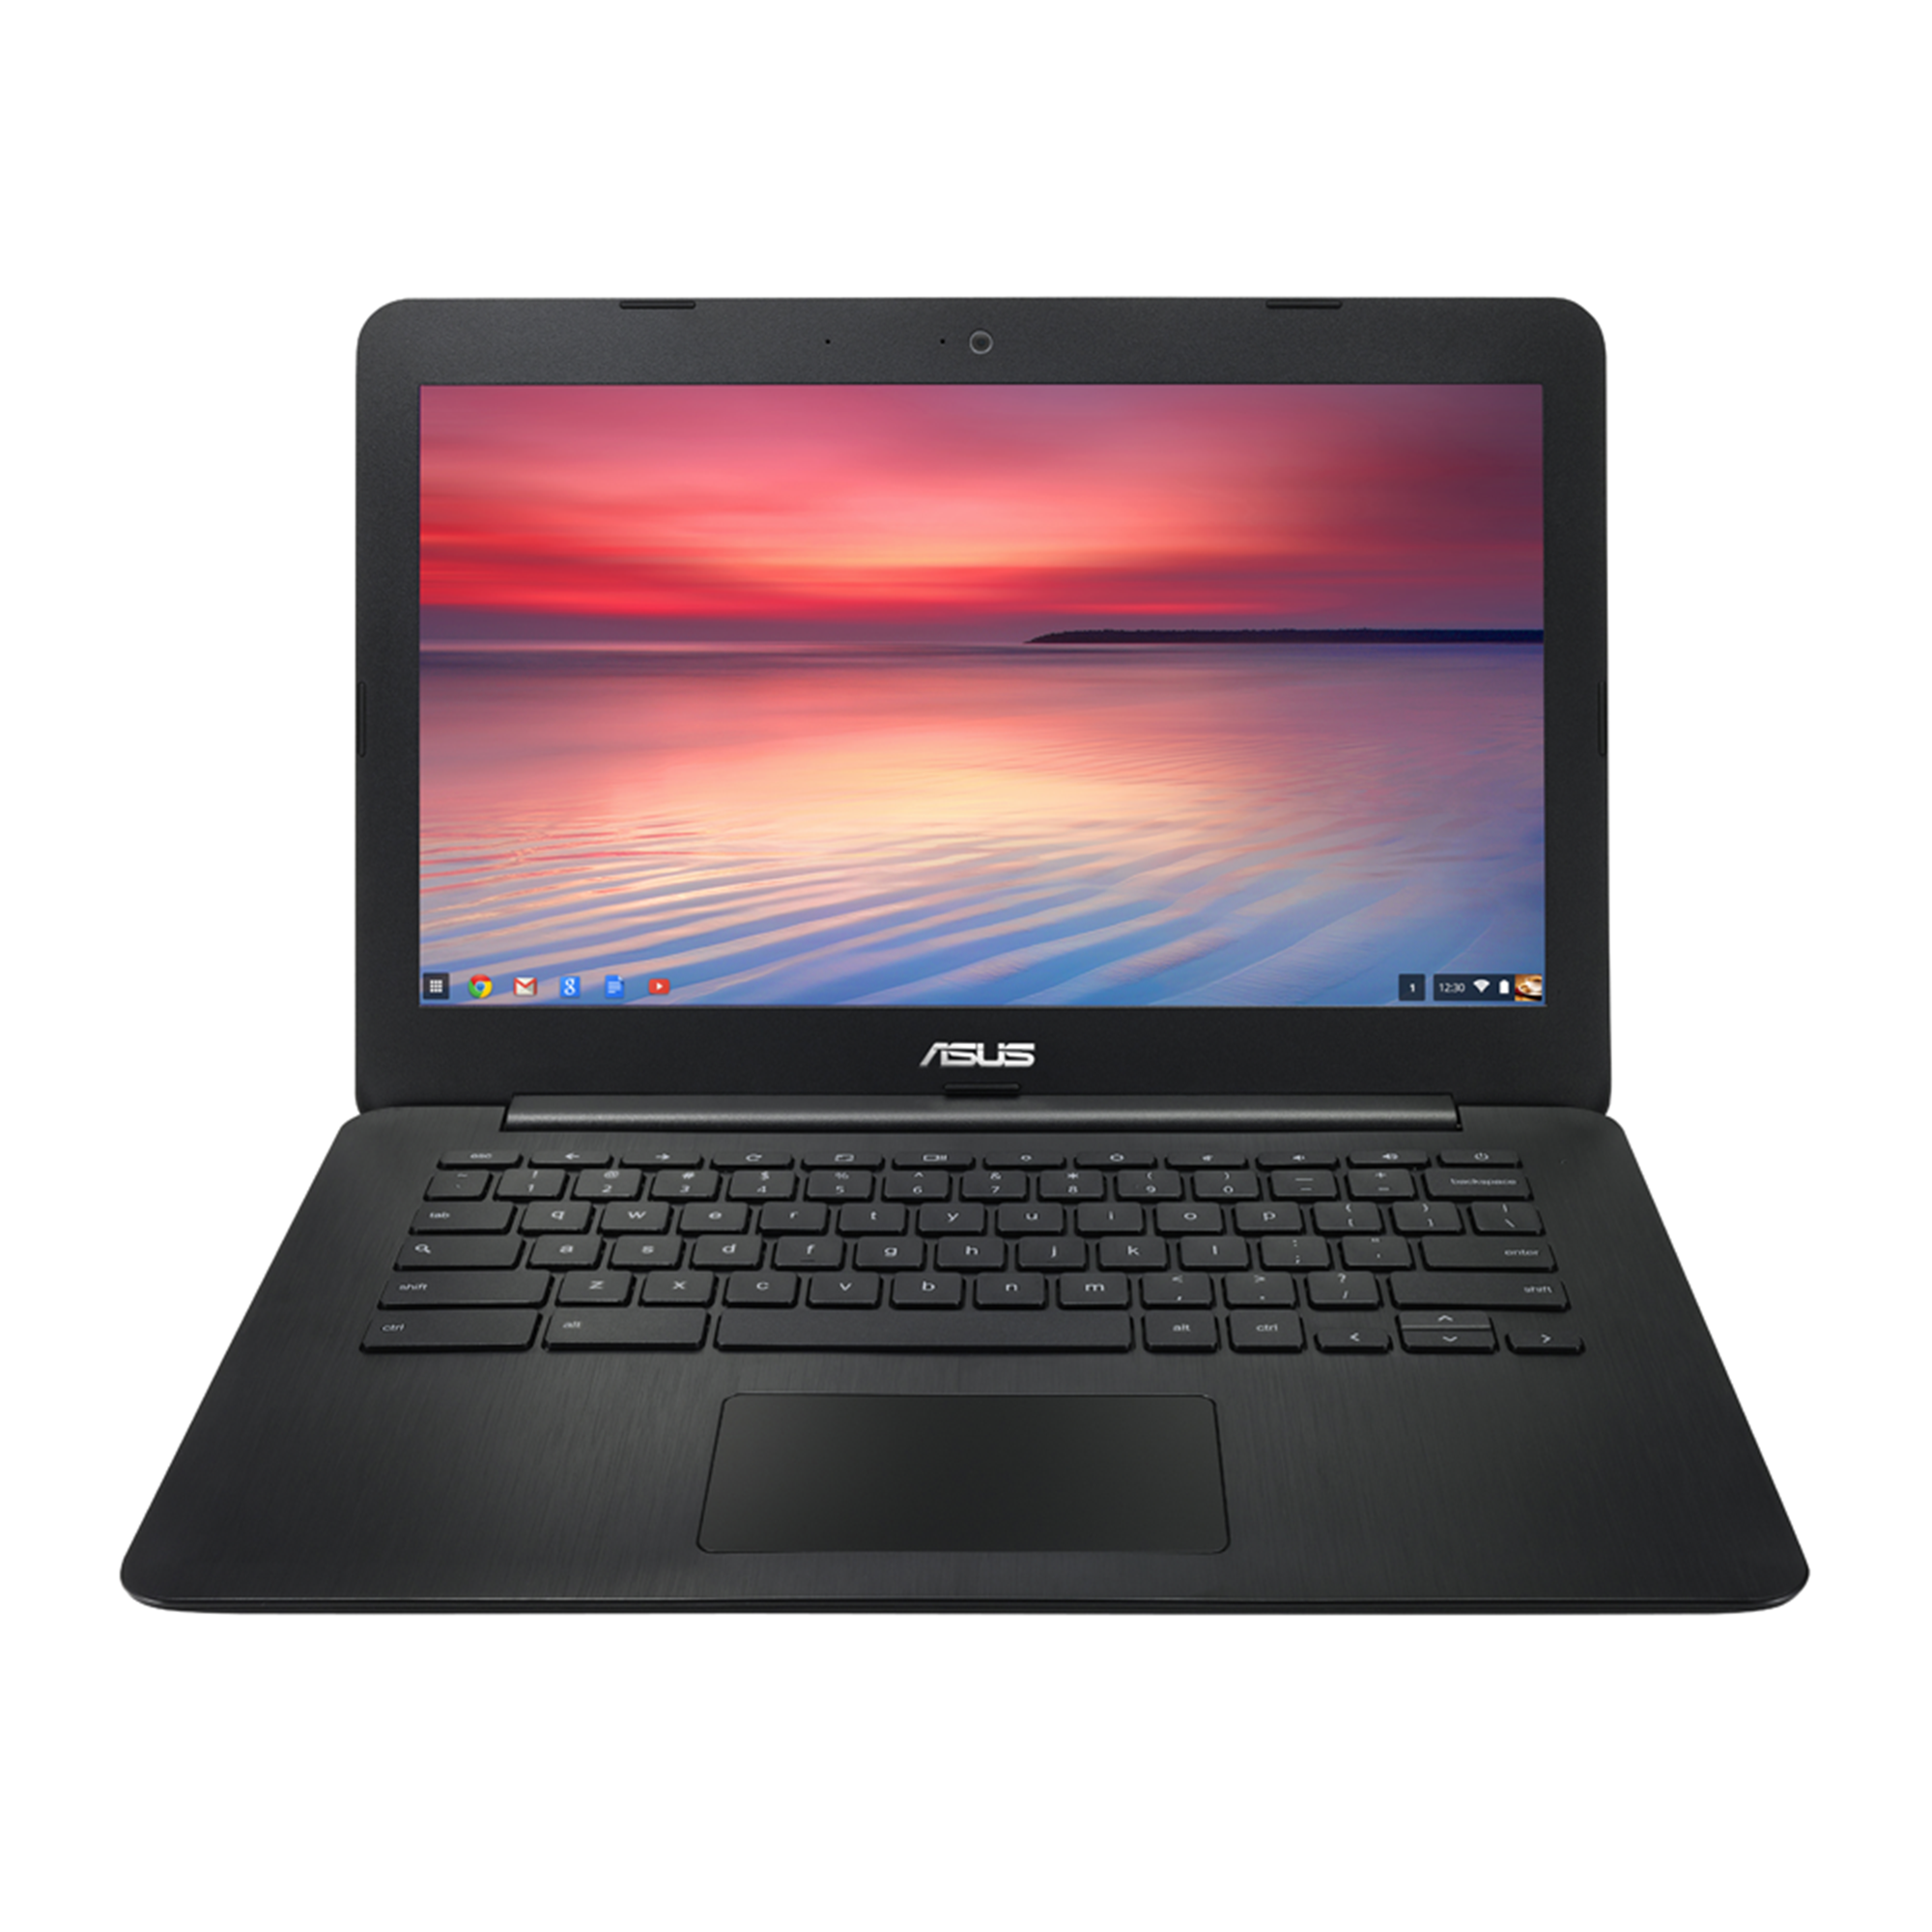 ASUS Chromebook C300｜Laptops For Home｜ASUS USA